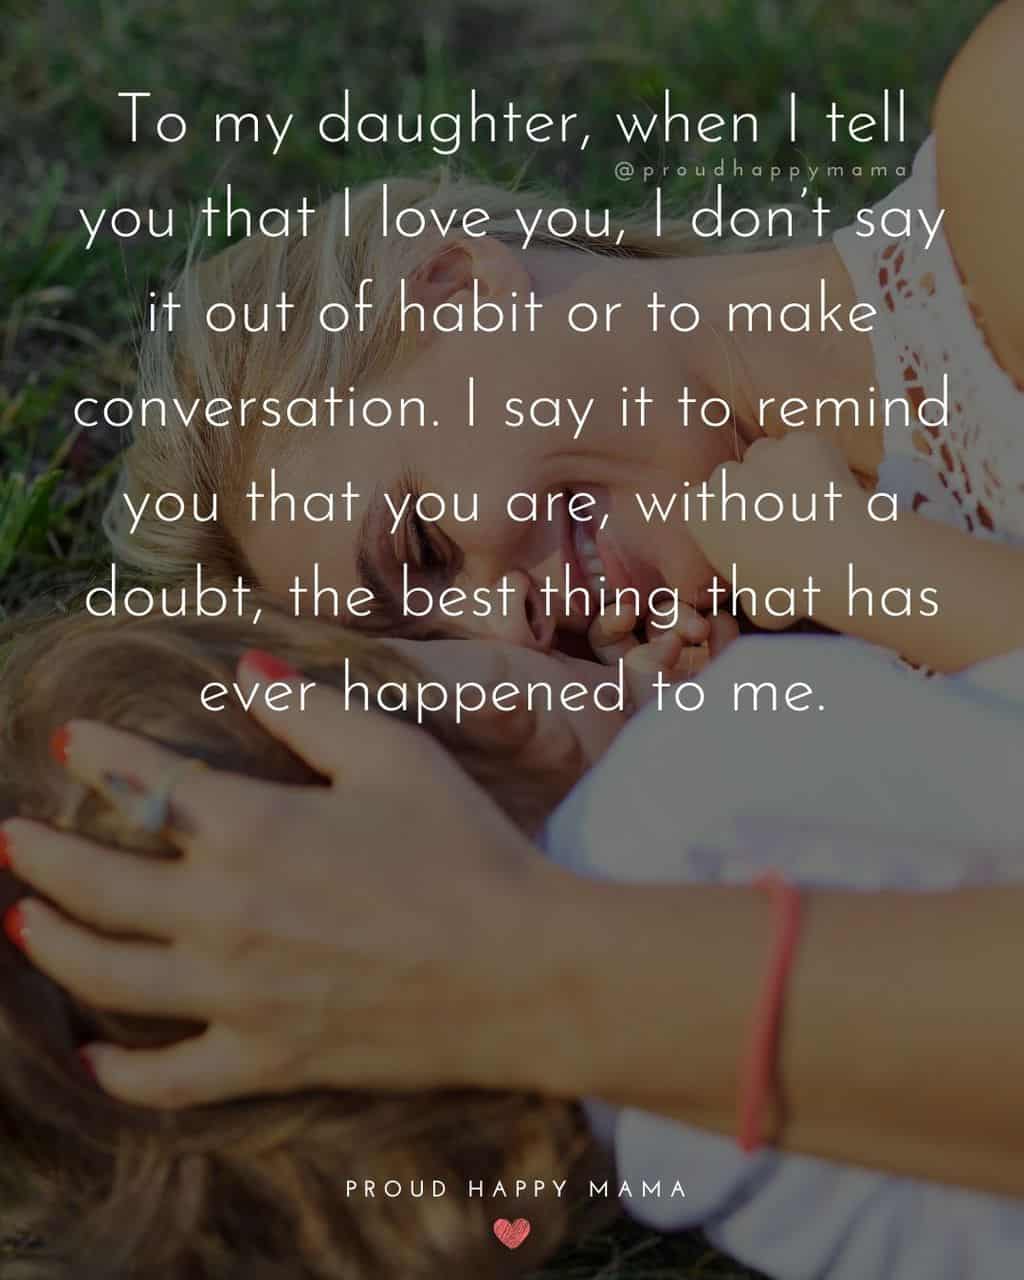 love my daughter quotes - ‘To my daughter, when I tell you that I love you, I don’t say it out of habit or to make conversation. I say it to remind you